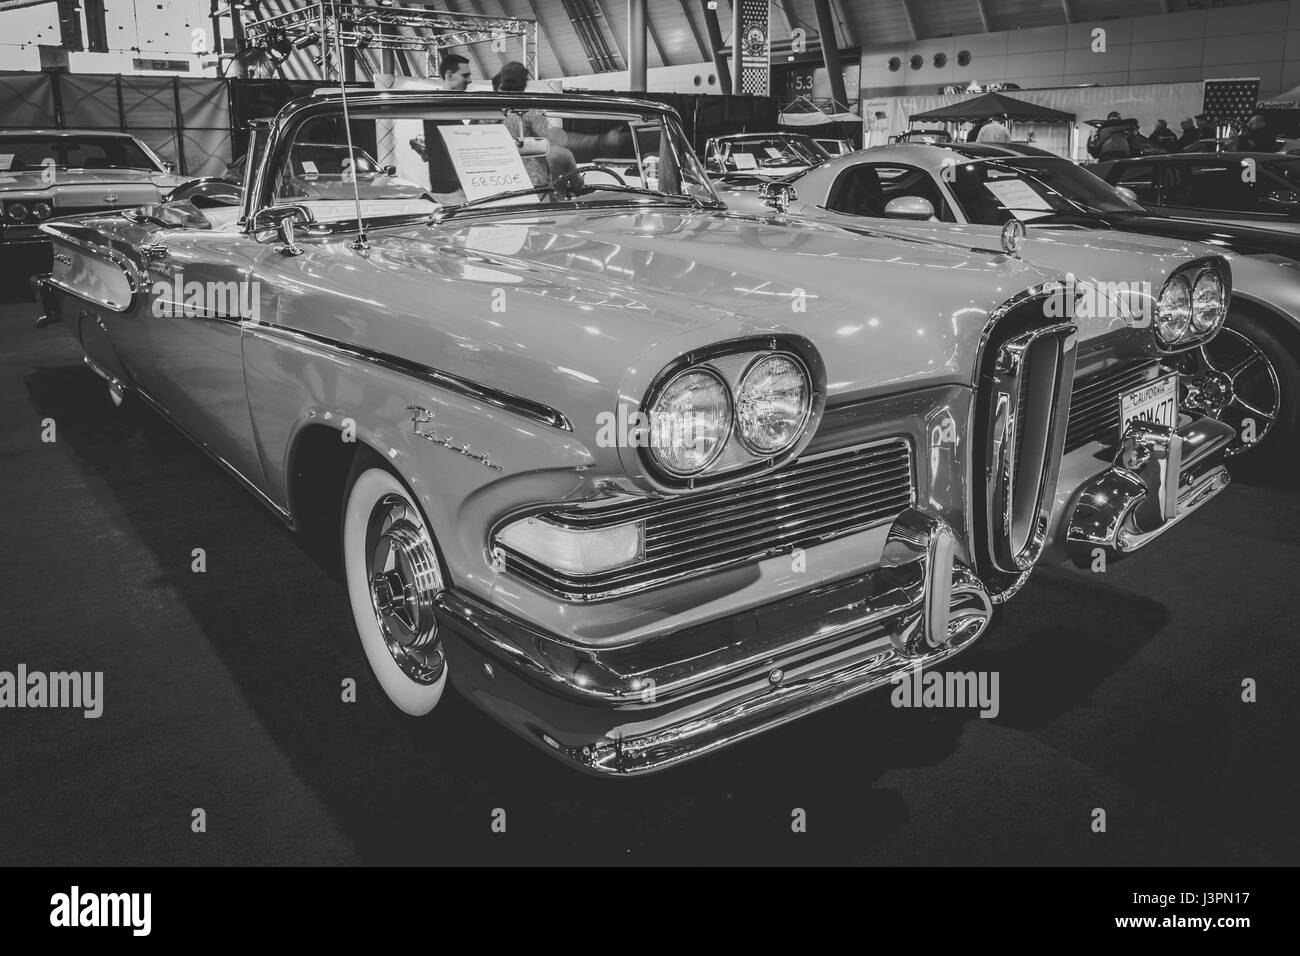 STUTTGART, GERMANY - MARCH 03, 2017: Full-size car Edsel Pacer Convertible, 1958. Vintage stylization. Black and white. Europe's greatest classic car exhibition 'RETRO CLASSICS' Stock Photo